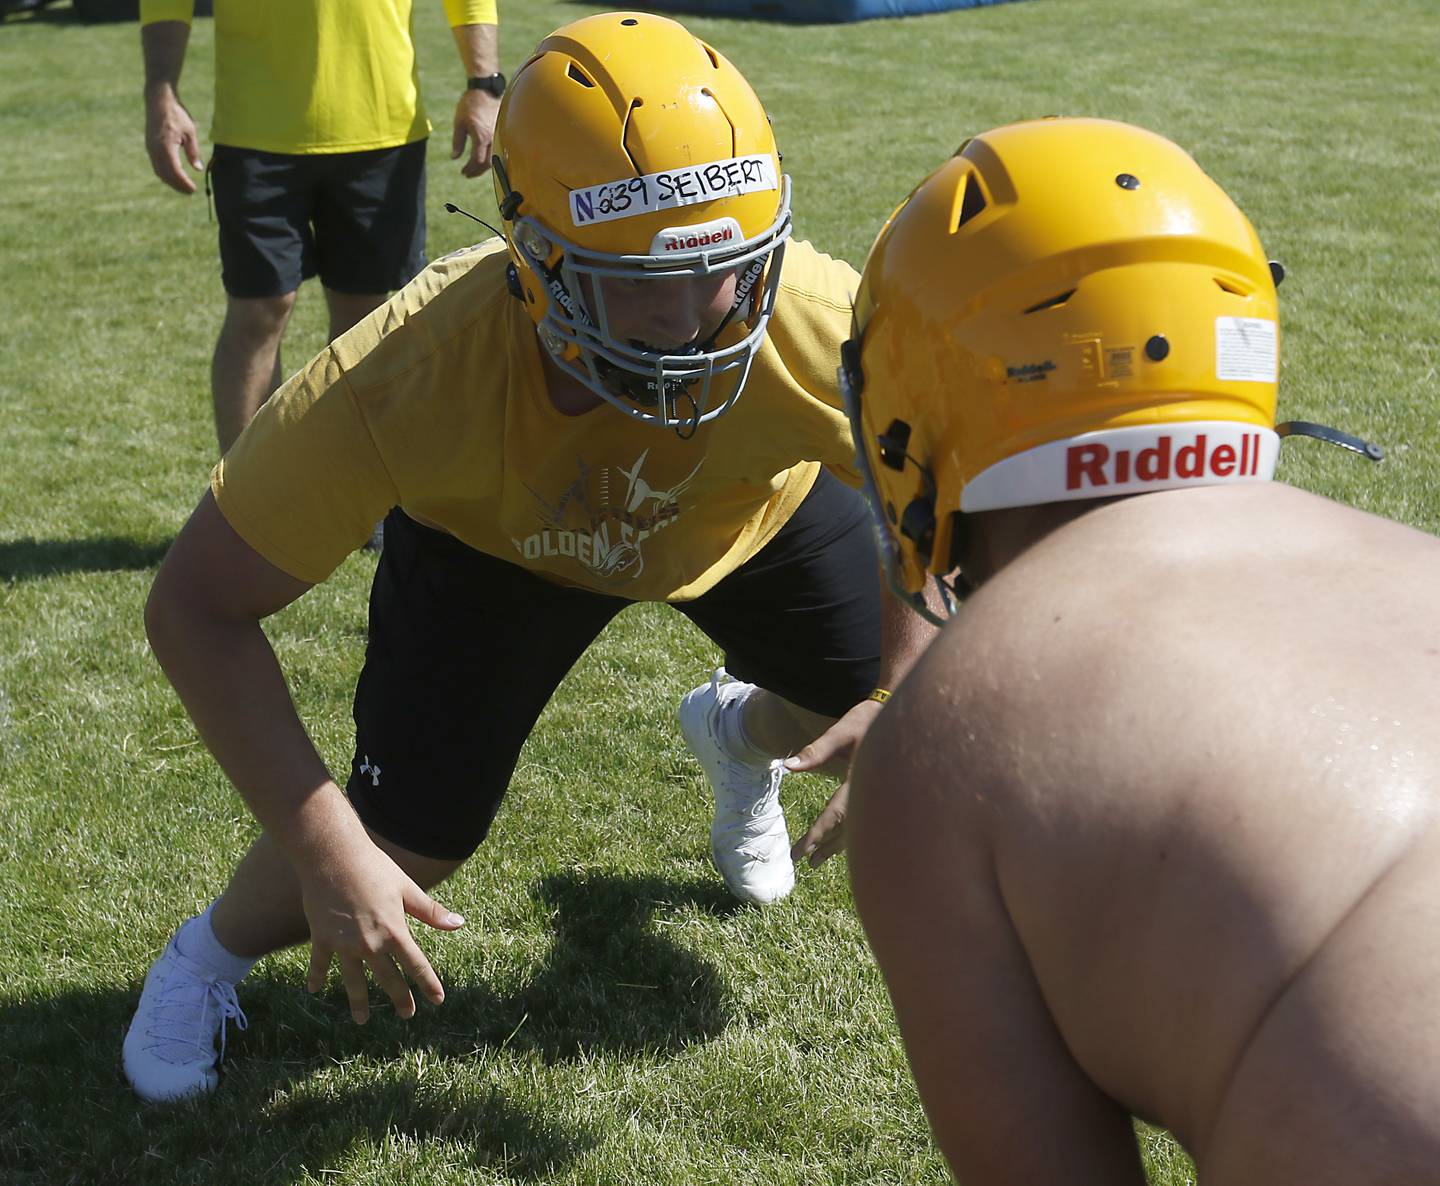 Will Siebert rushes a blocker during football practice Monday, June 20, 2022, at Jacobs High School in Algonquin.